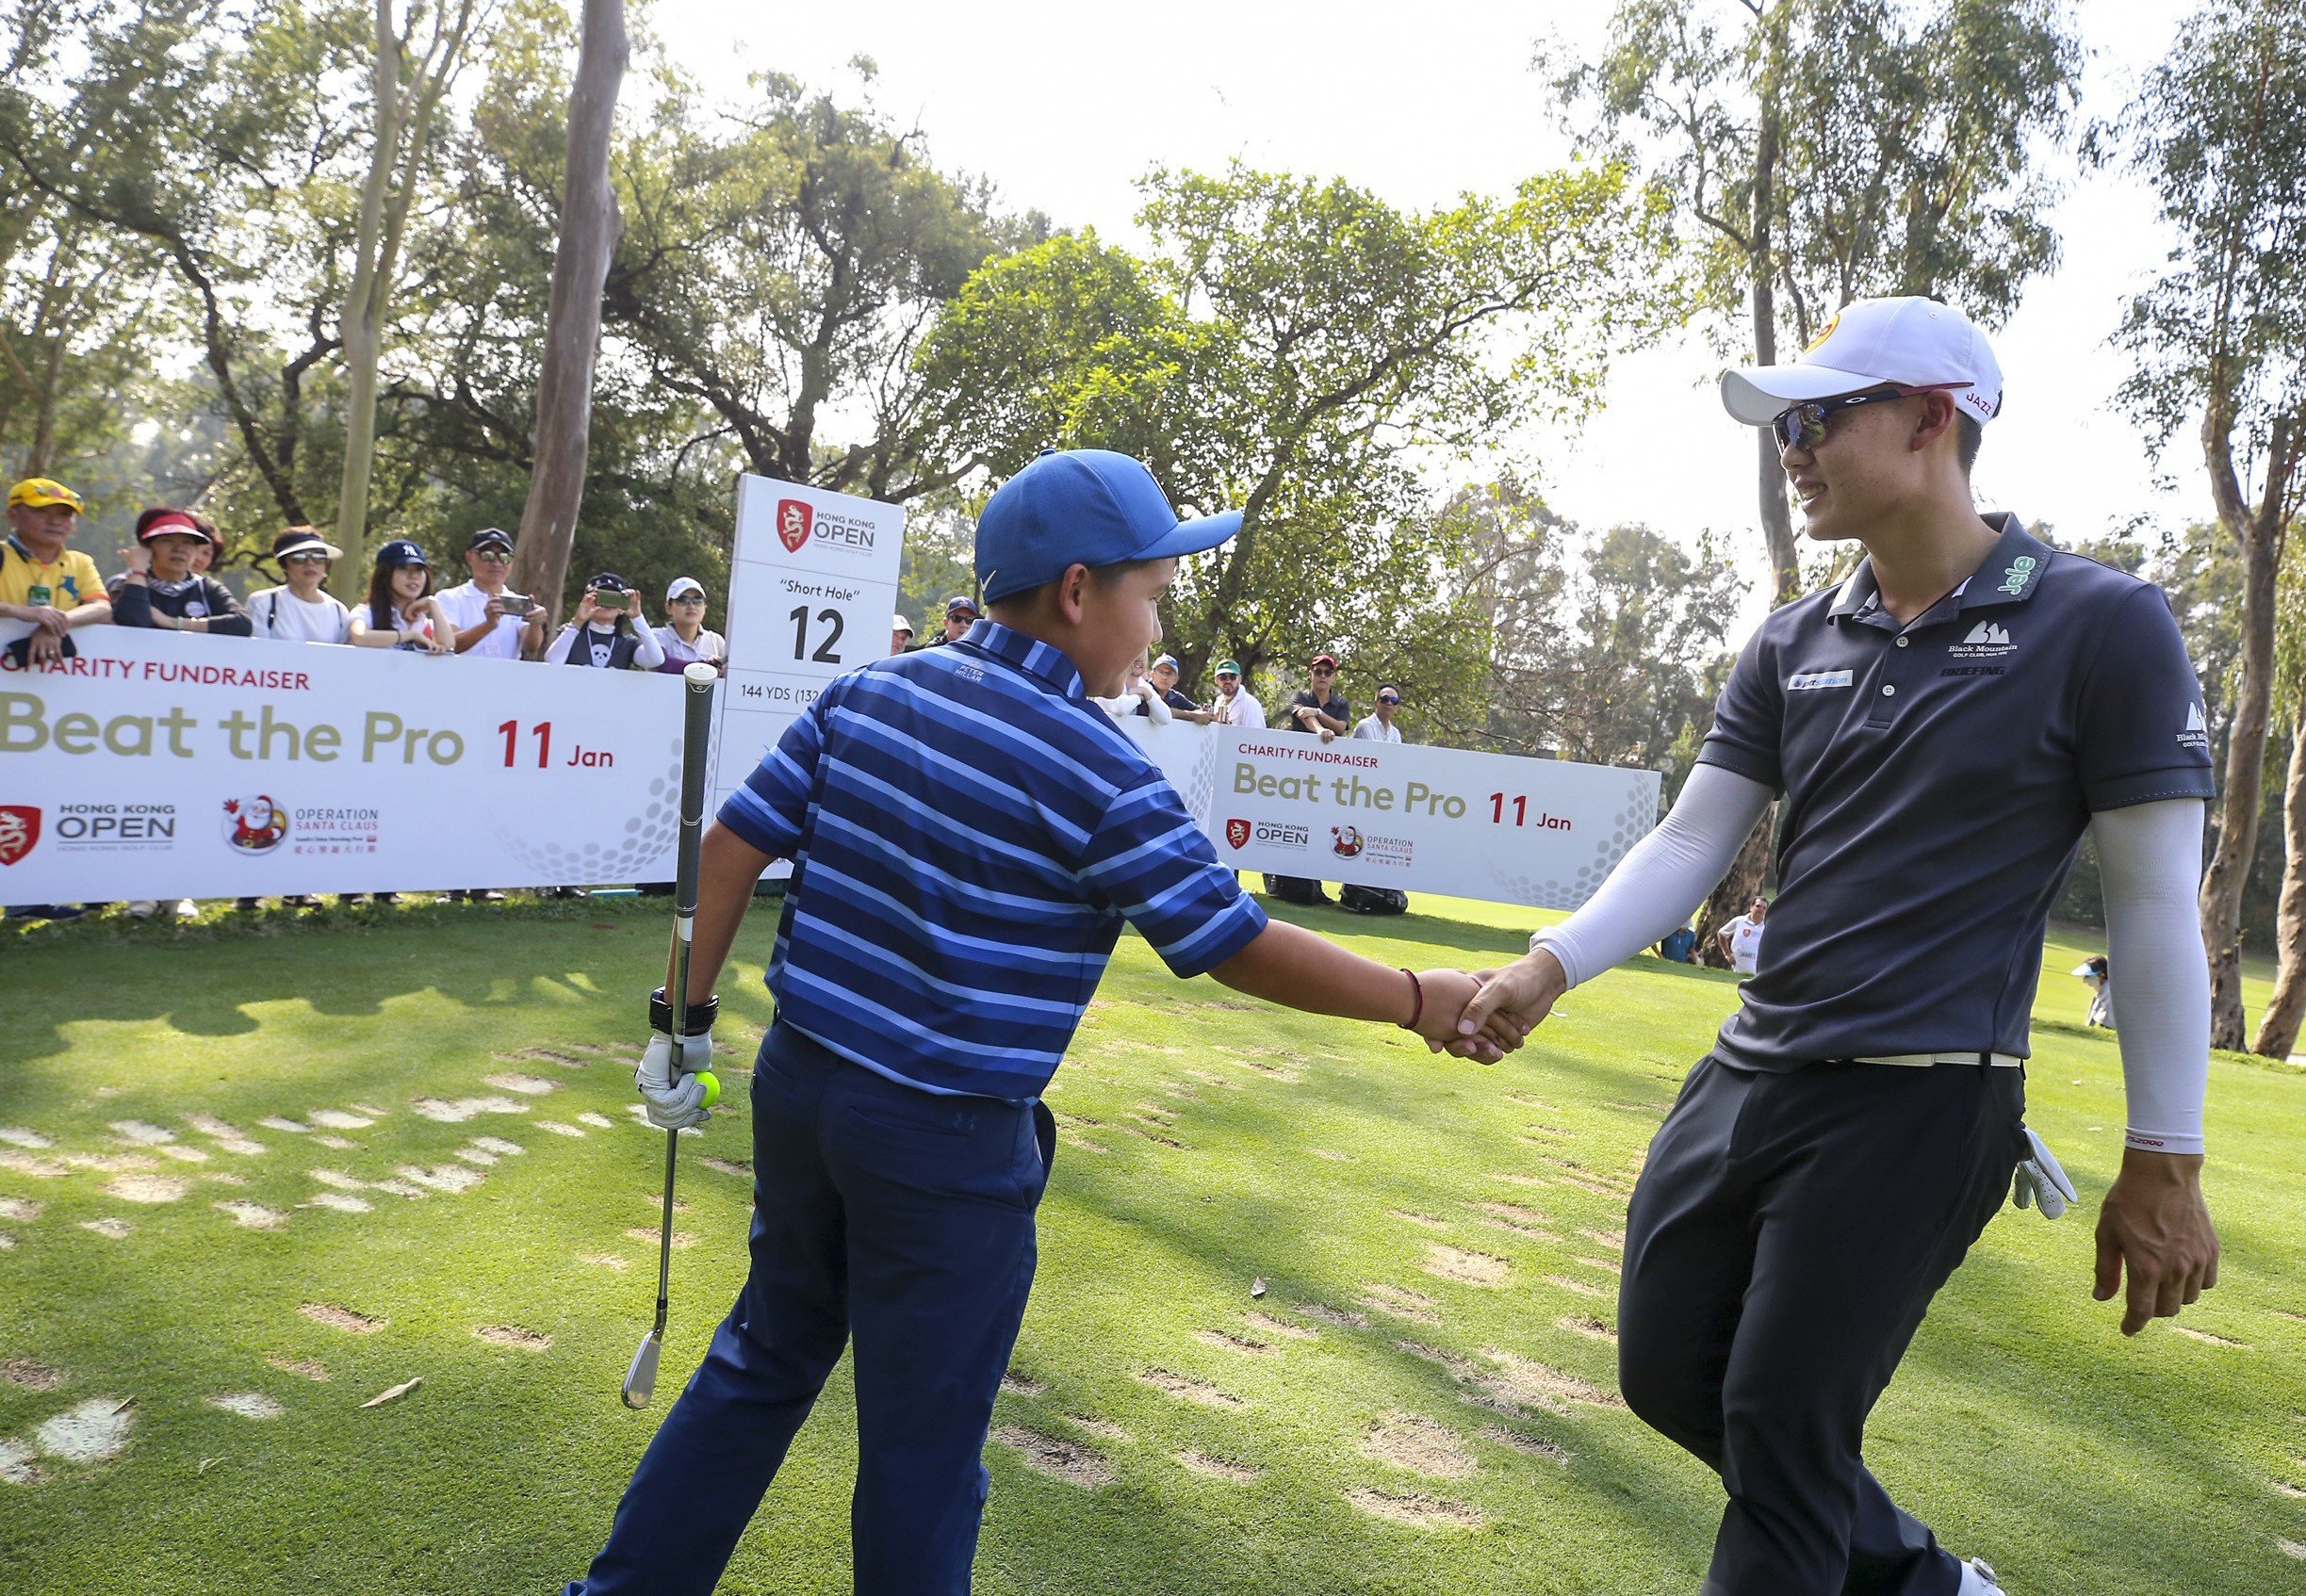 Jazz Janewattananond, of Thailand, shakes hands with a young golfer taking part in the Beat the Pro competition during the Hong Kong Open. Photo: Dickson Lee